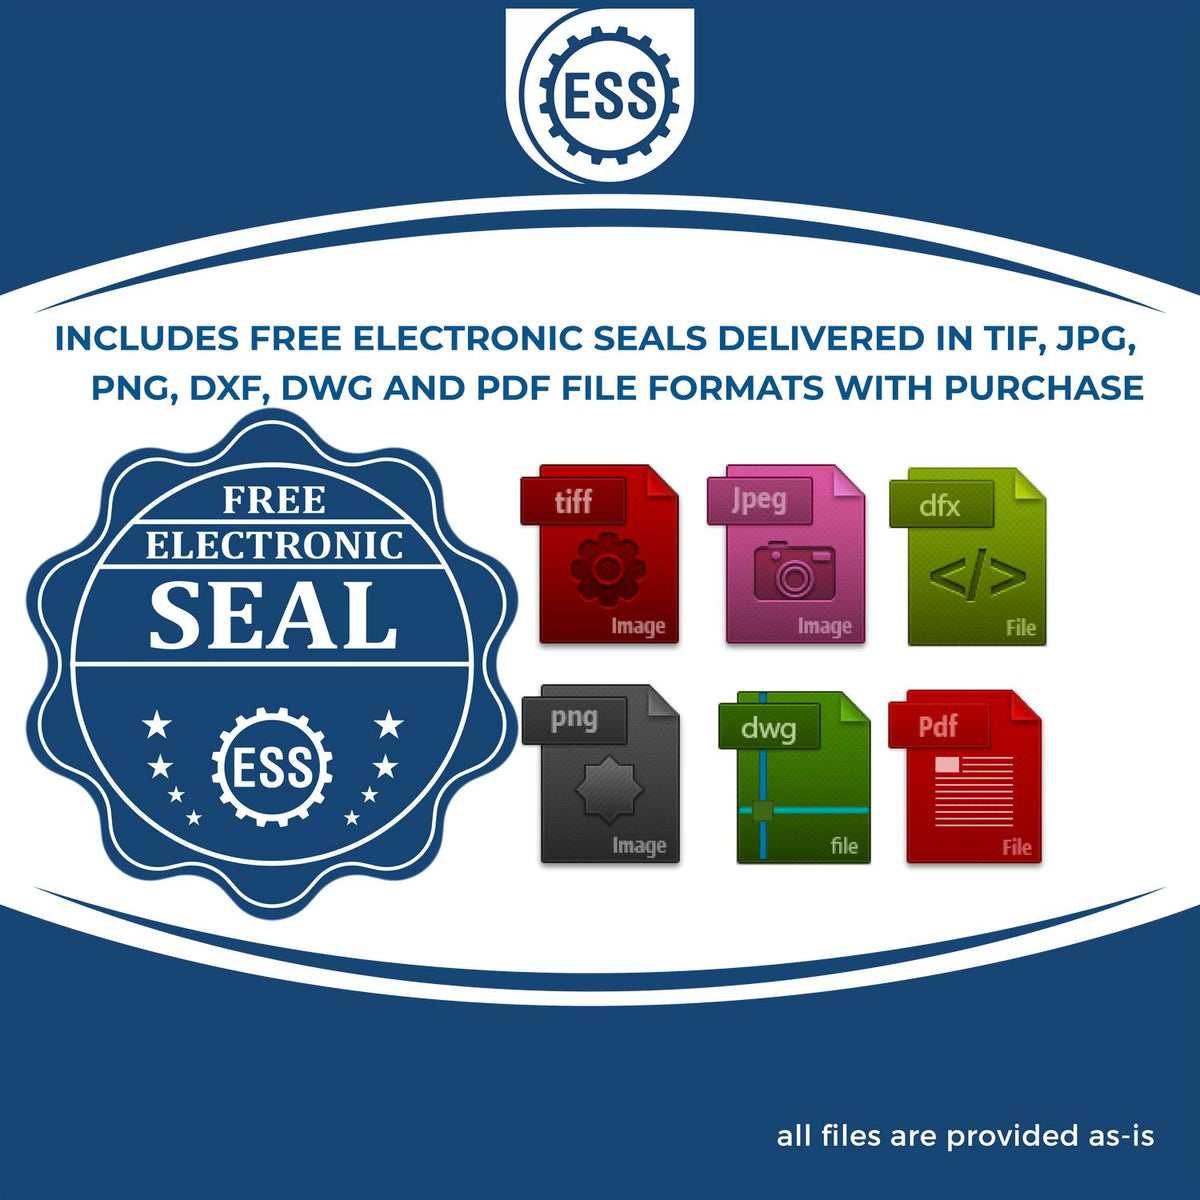 An infographic for the free electronic seal for the Self-Inking Kansas Landscape Architect Stamp illustrating the different file type icons such as DXF, DWG, TIF, JPG and PNG.